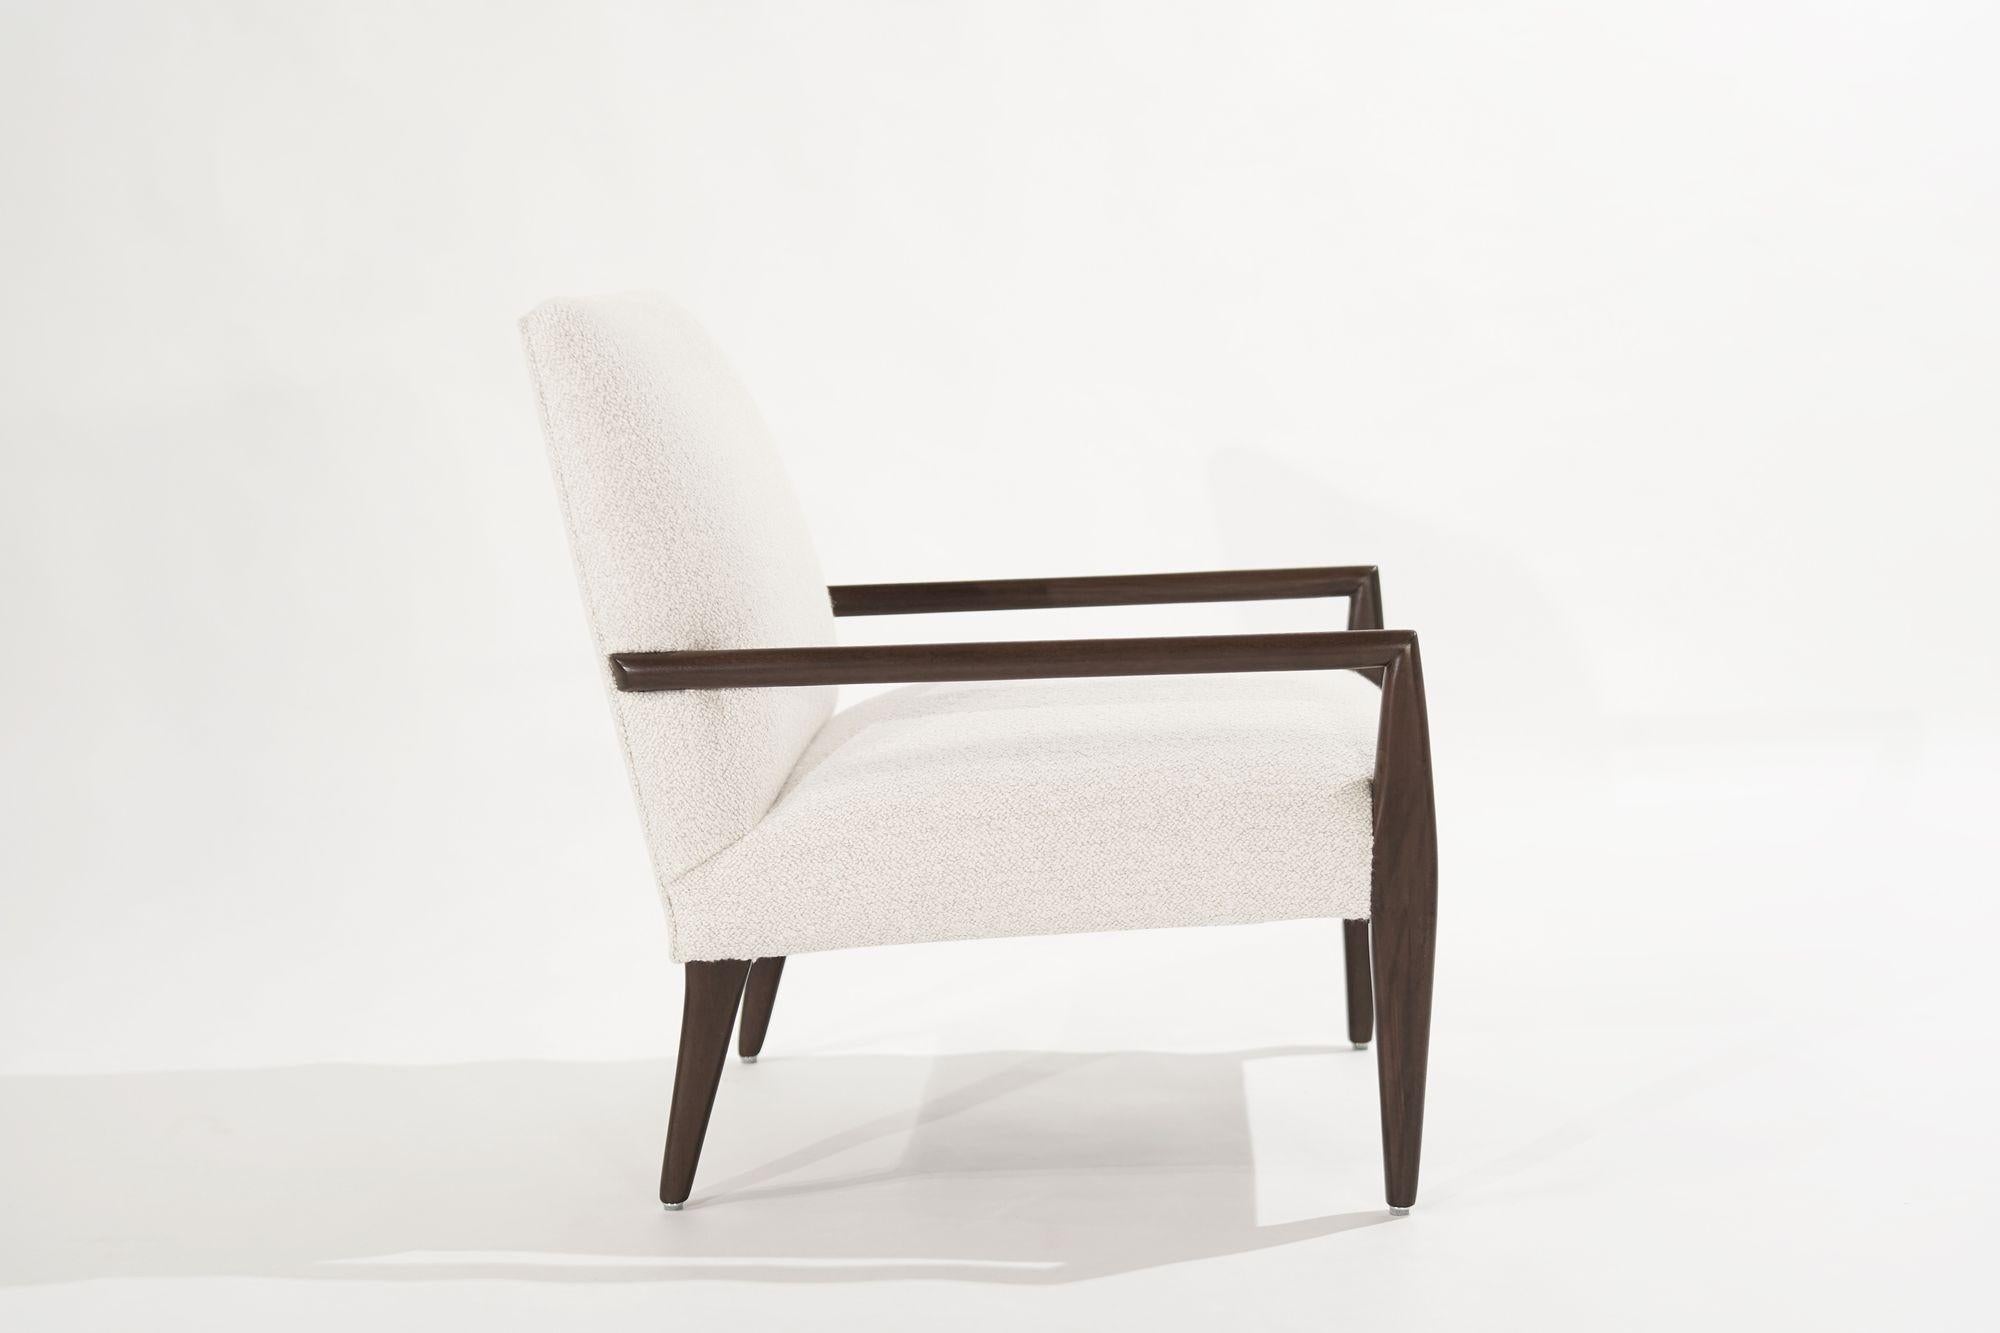 Lounge chair executed in mahogany designed by T.H. Robsjohn-Gibbings for Widdicomb, circa 1950-1959. Framework fully restored, reupholstered in off-white bouclé by Holly Hunt.
 
Other designers from this period include Paul McCobb, Vladimir Kagan,